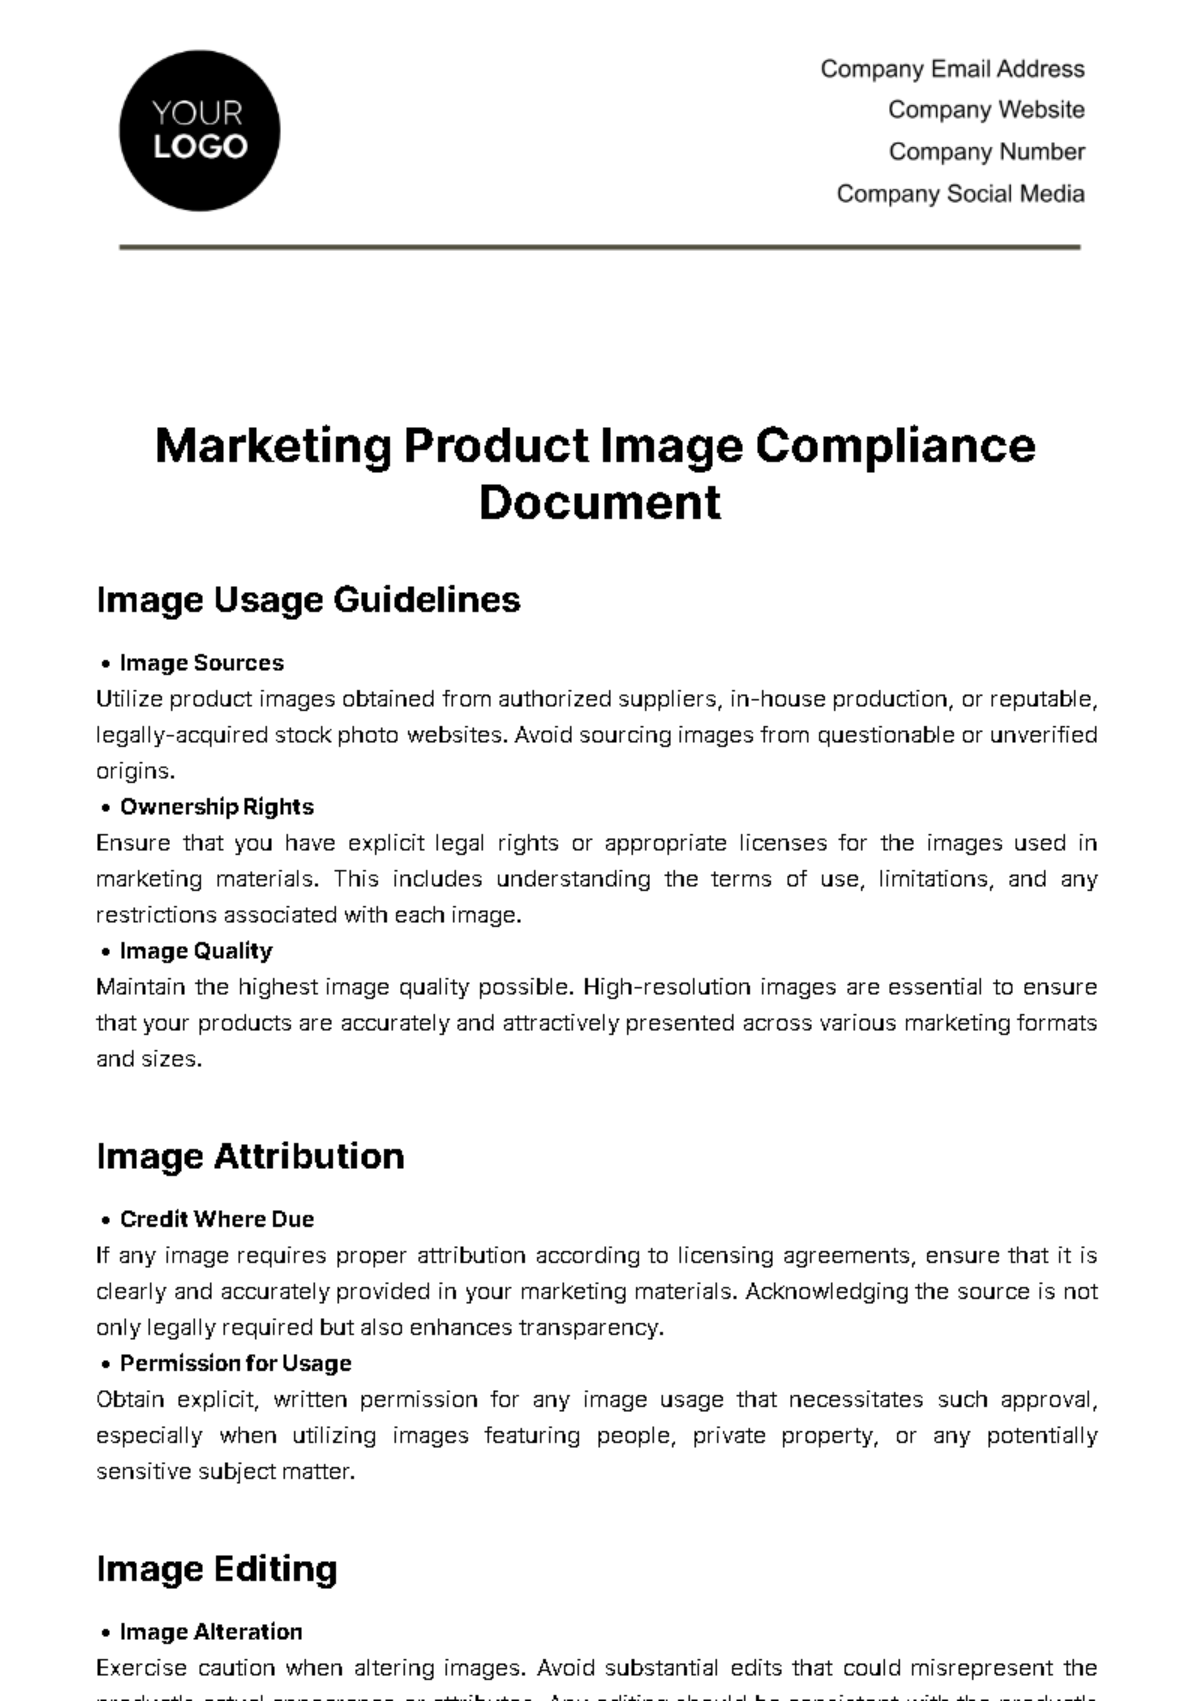 Free Marketing Product Image Compliance Document Template